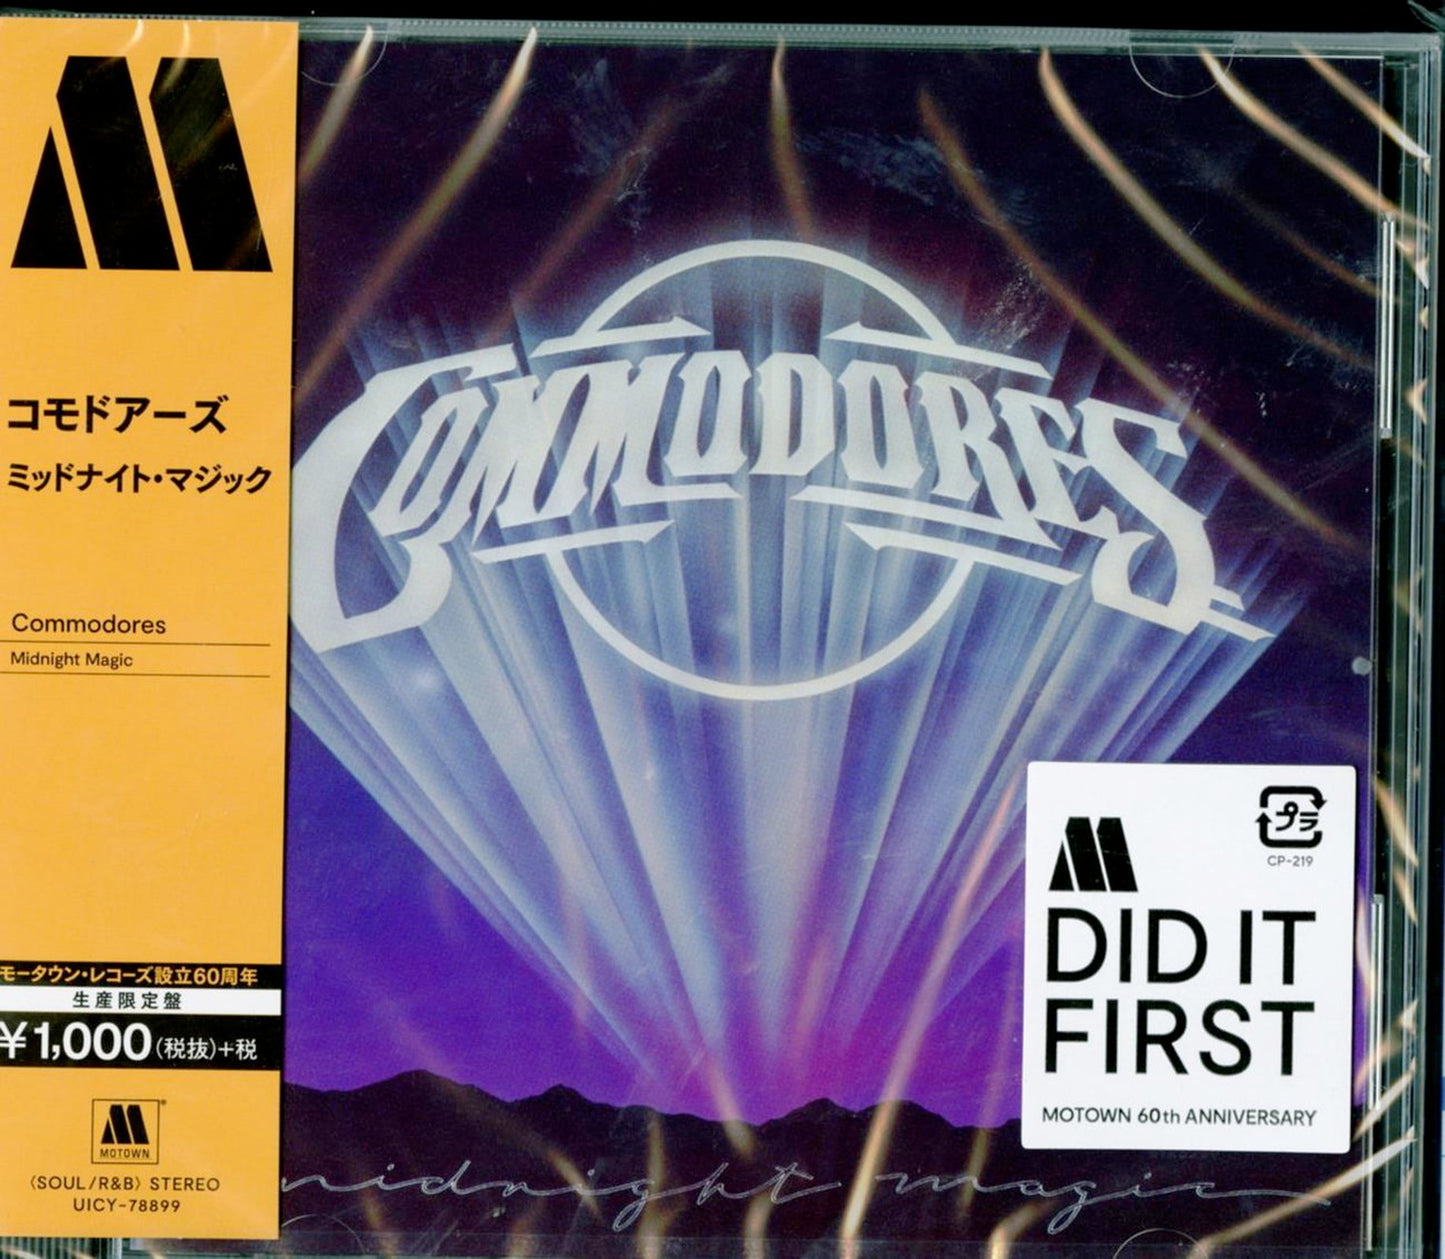 Commodores - Midnight Magic (Release year: 2019) - Japan  CD Limited Edition